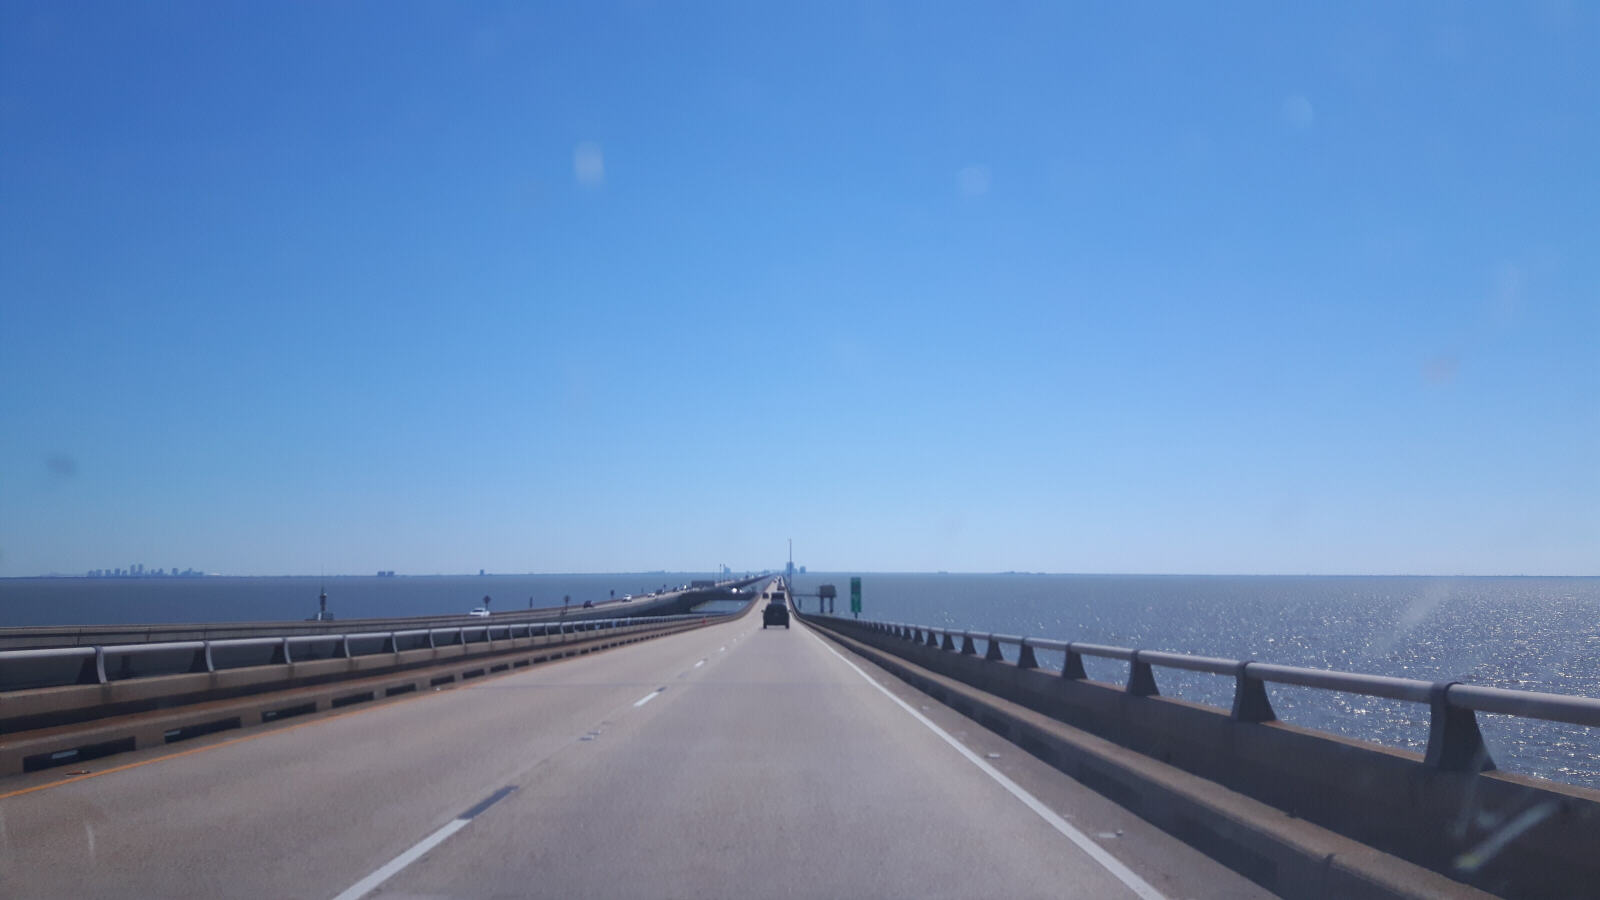 The longest bridge in the world, to New Orleans